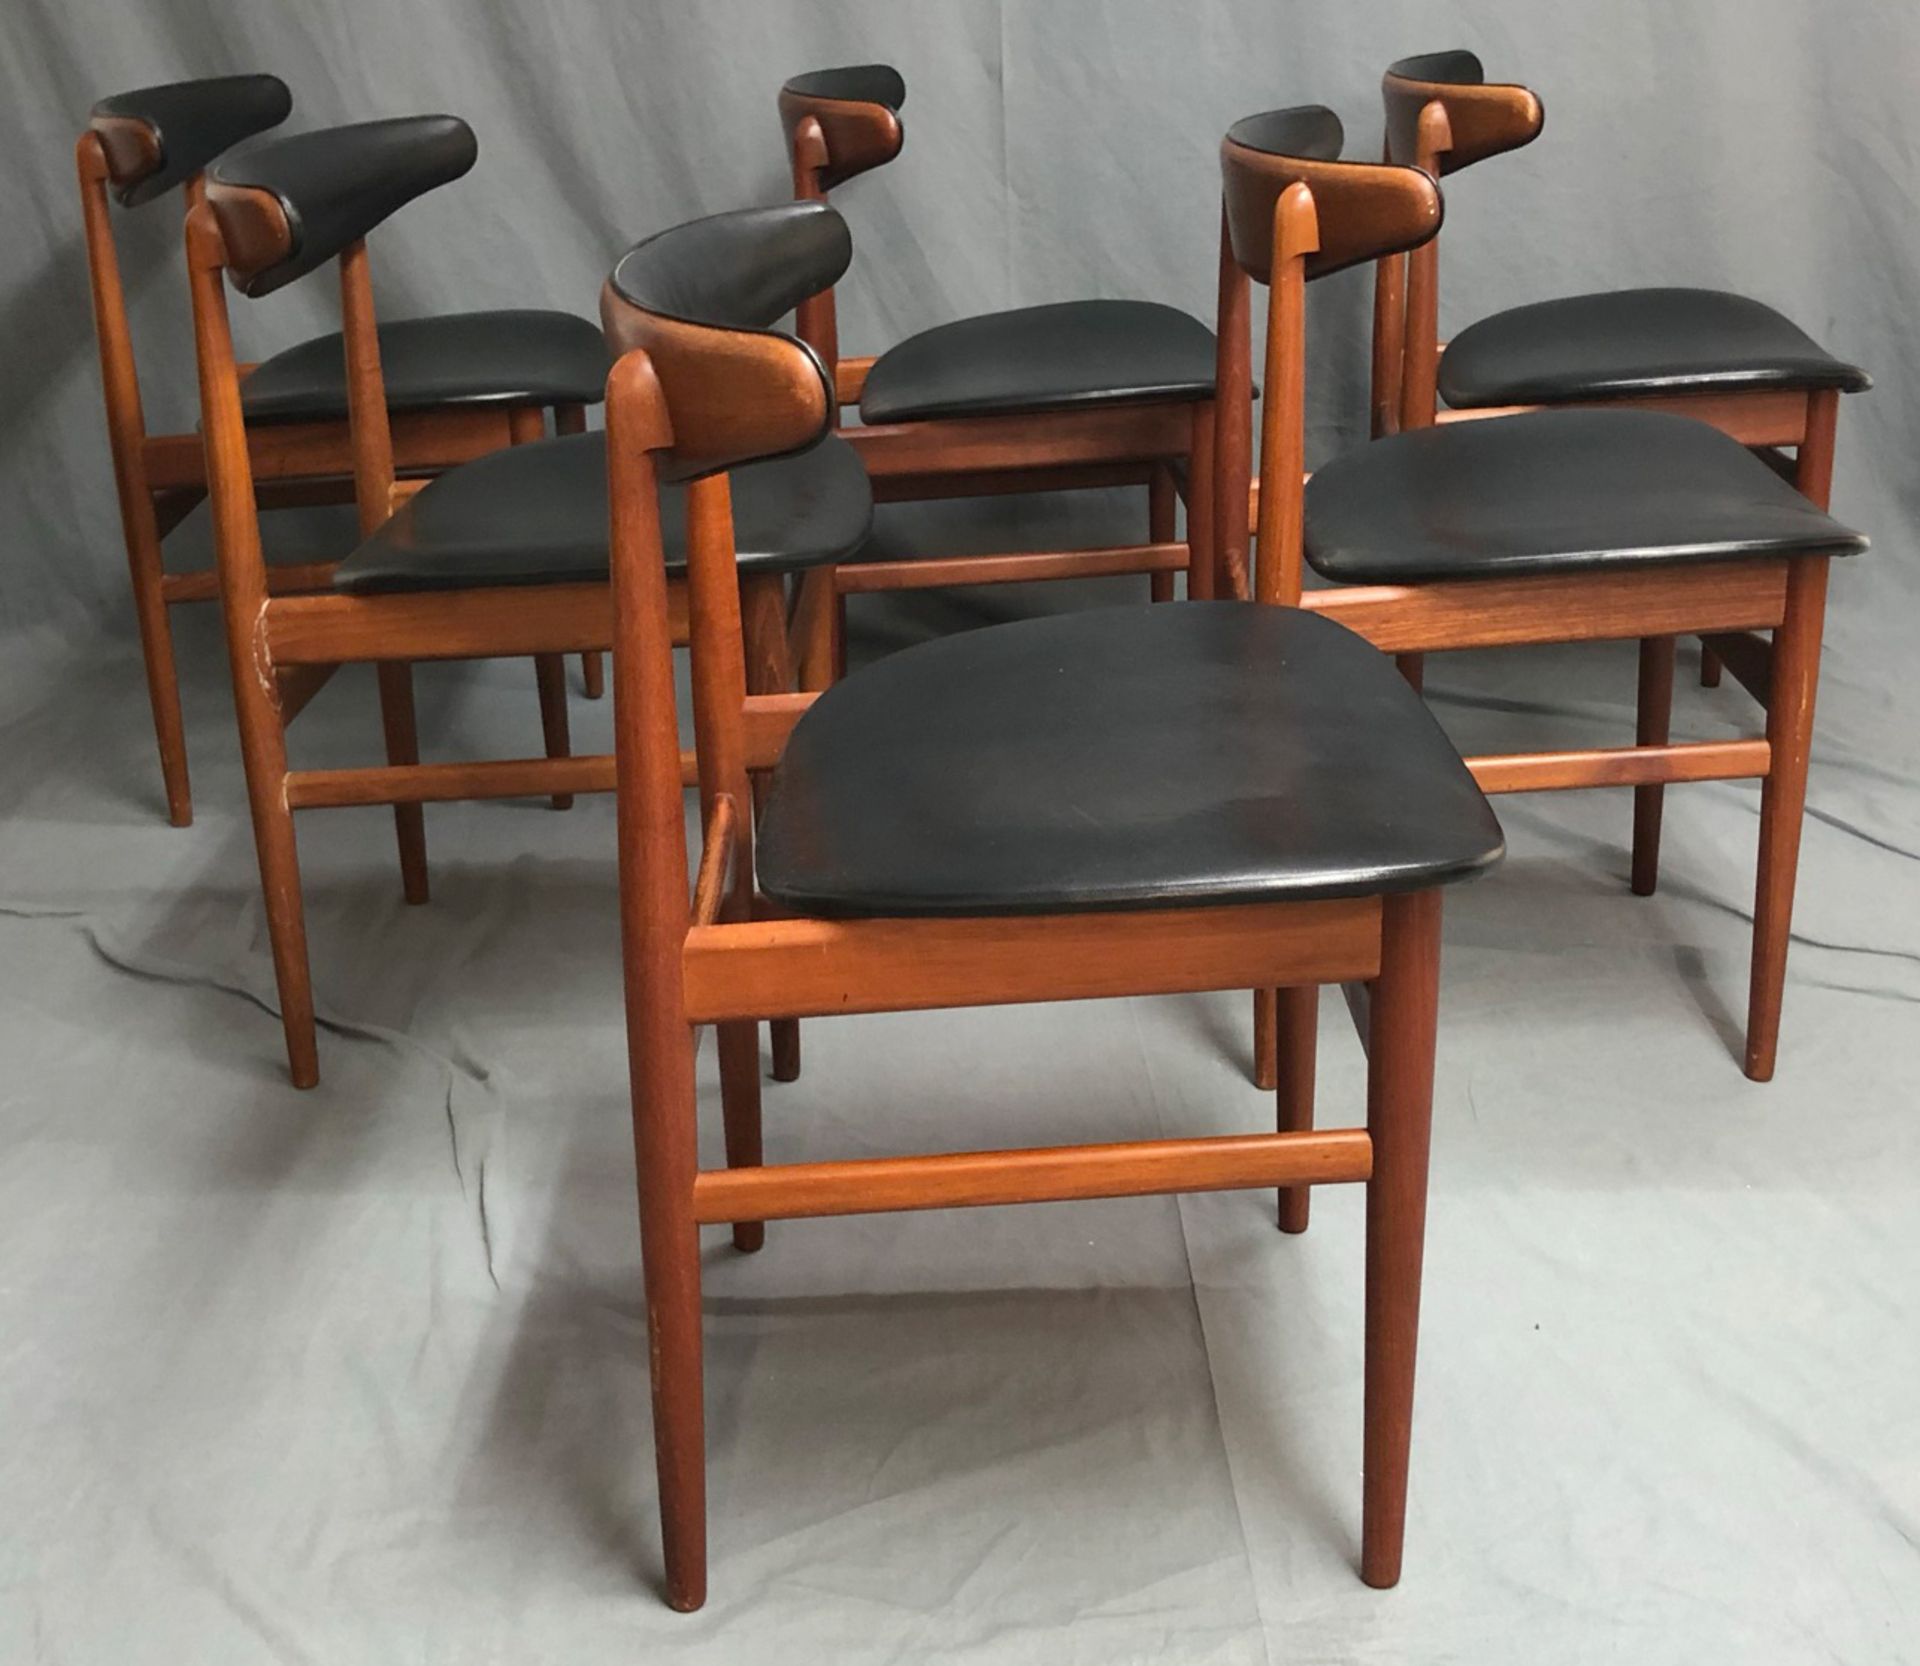 DANEX Furniture. 6 teak wood chairs. '' Made in Denmark ''. - Image 7 of 11